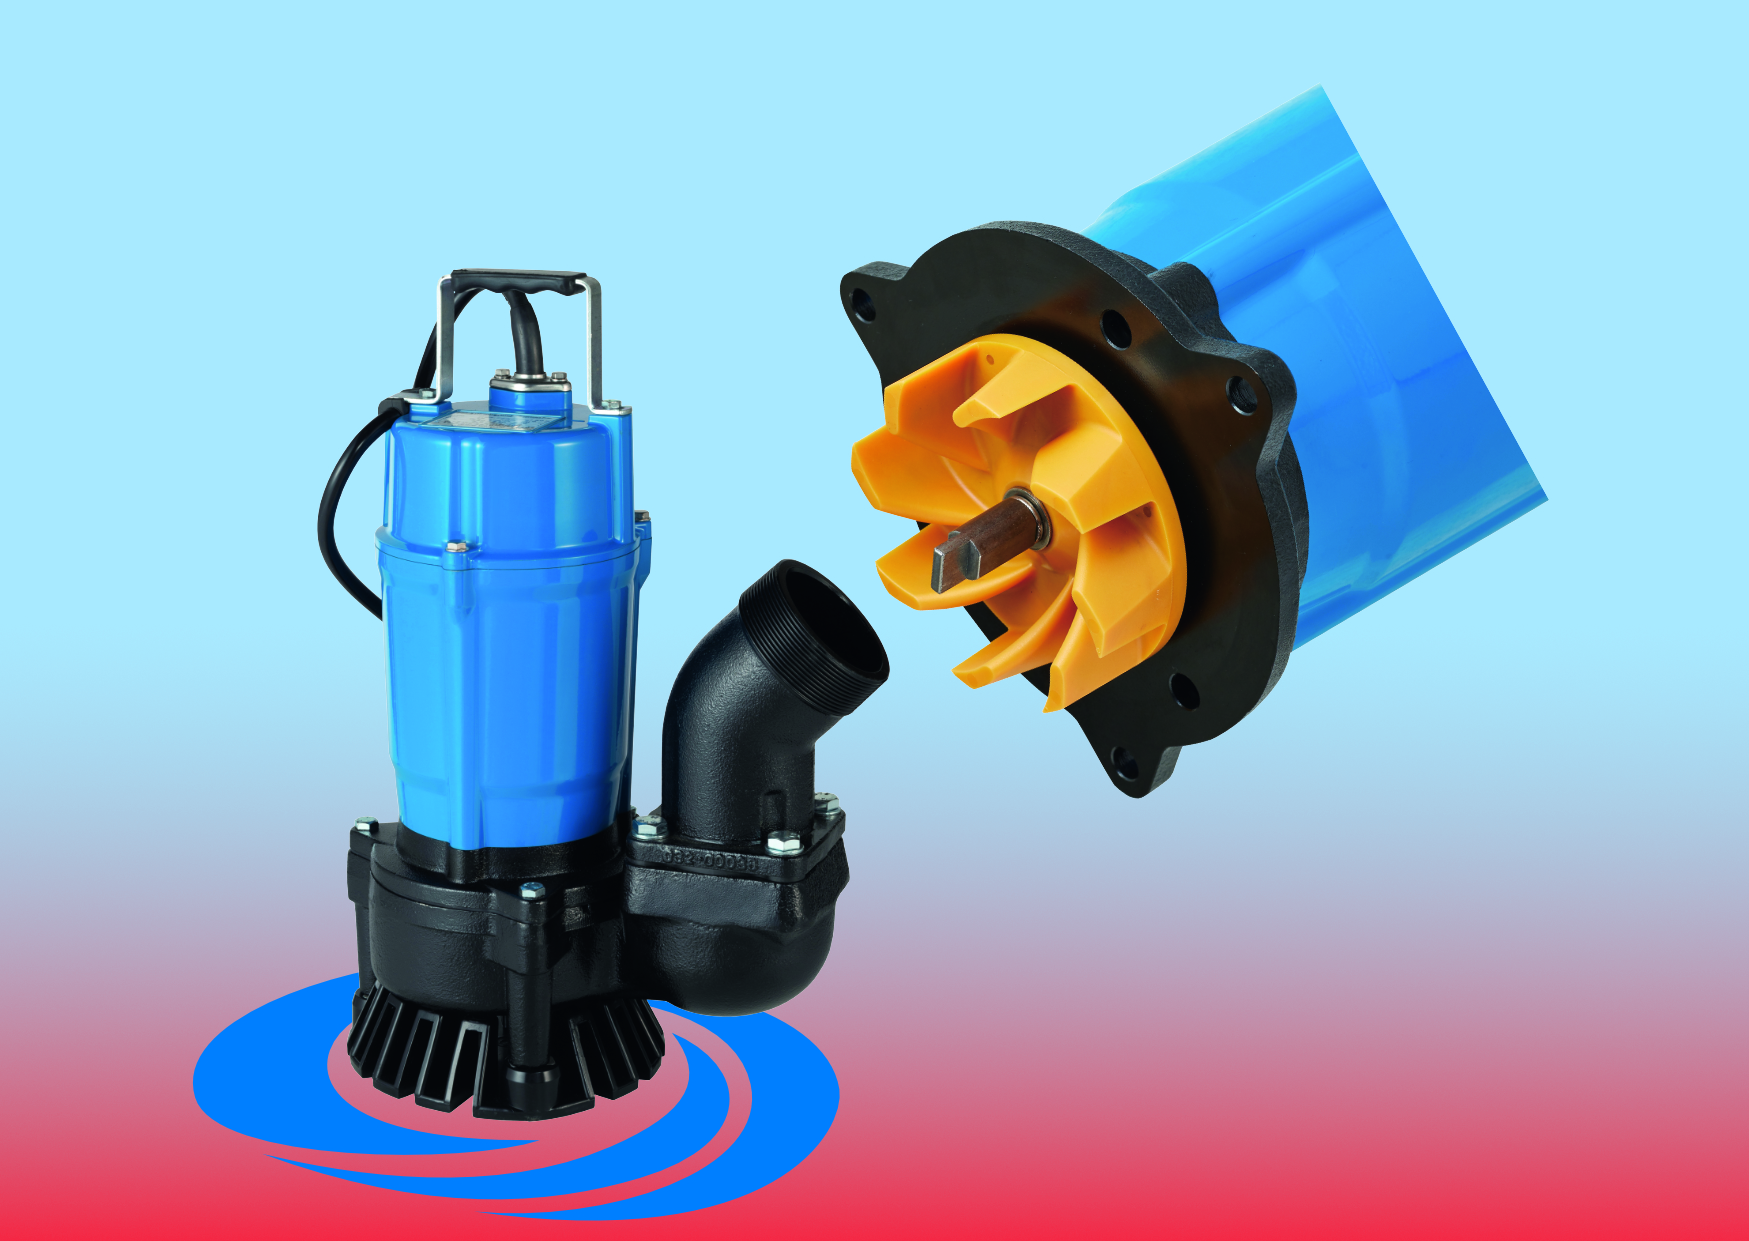 Tsurumi’s new HS3.75SL submersible pump for dewatering tasks has a small, energy efficient motor with an output of 750 w.